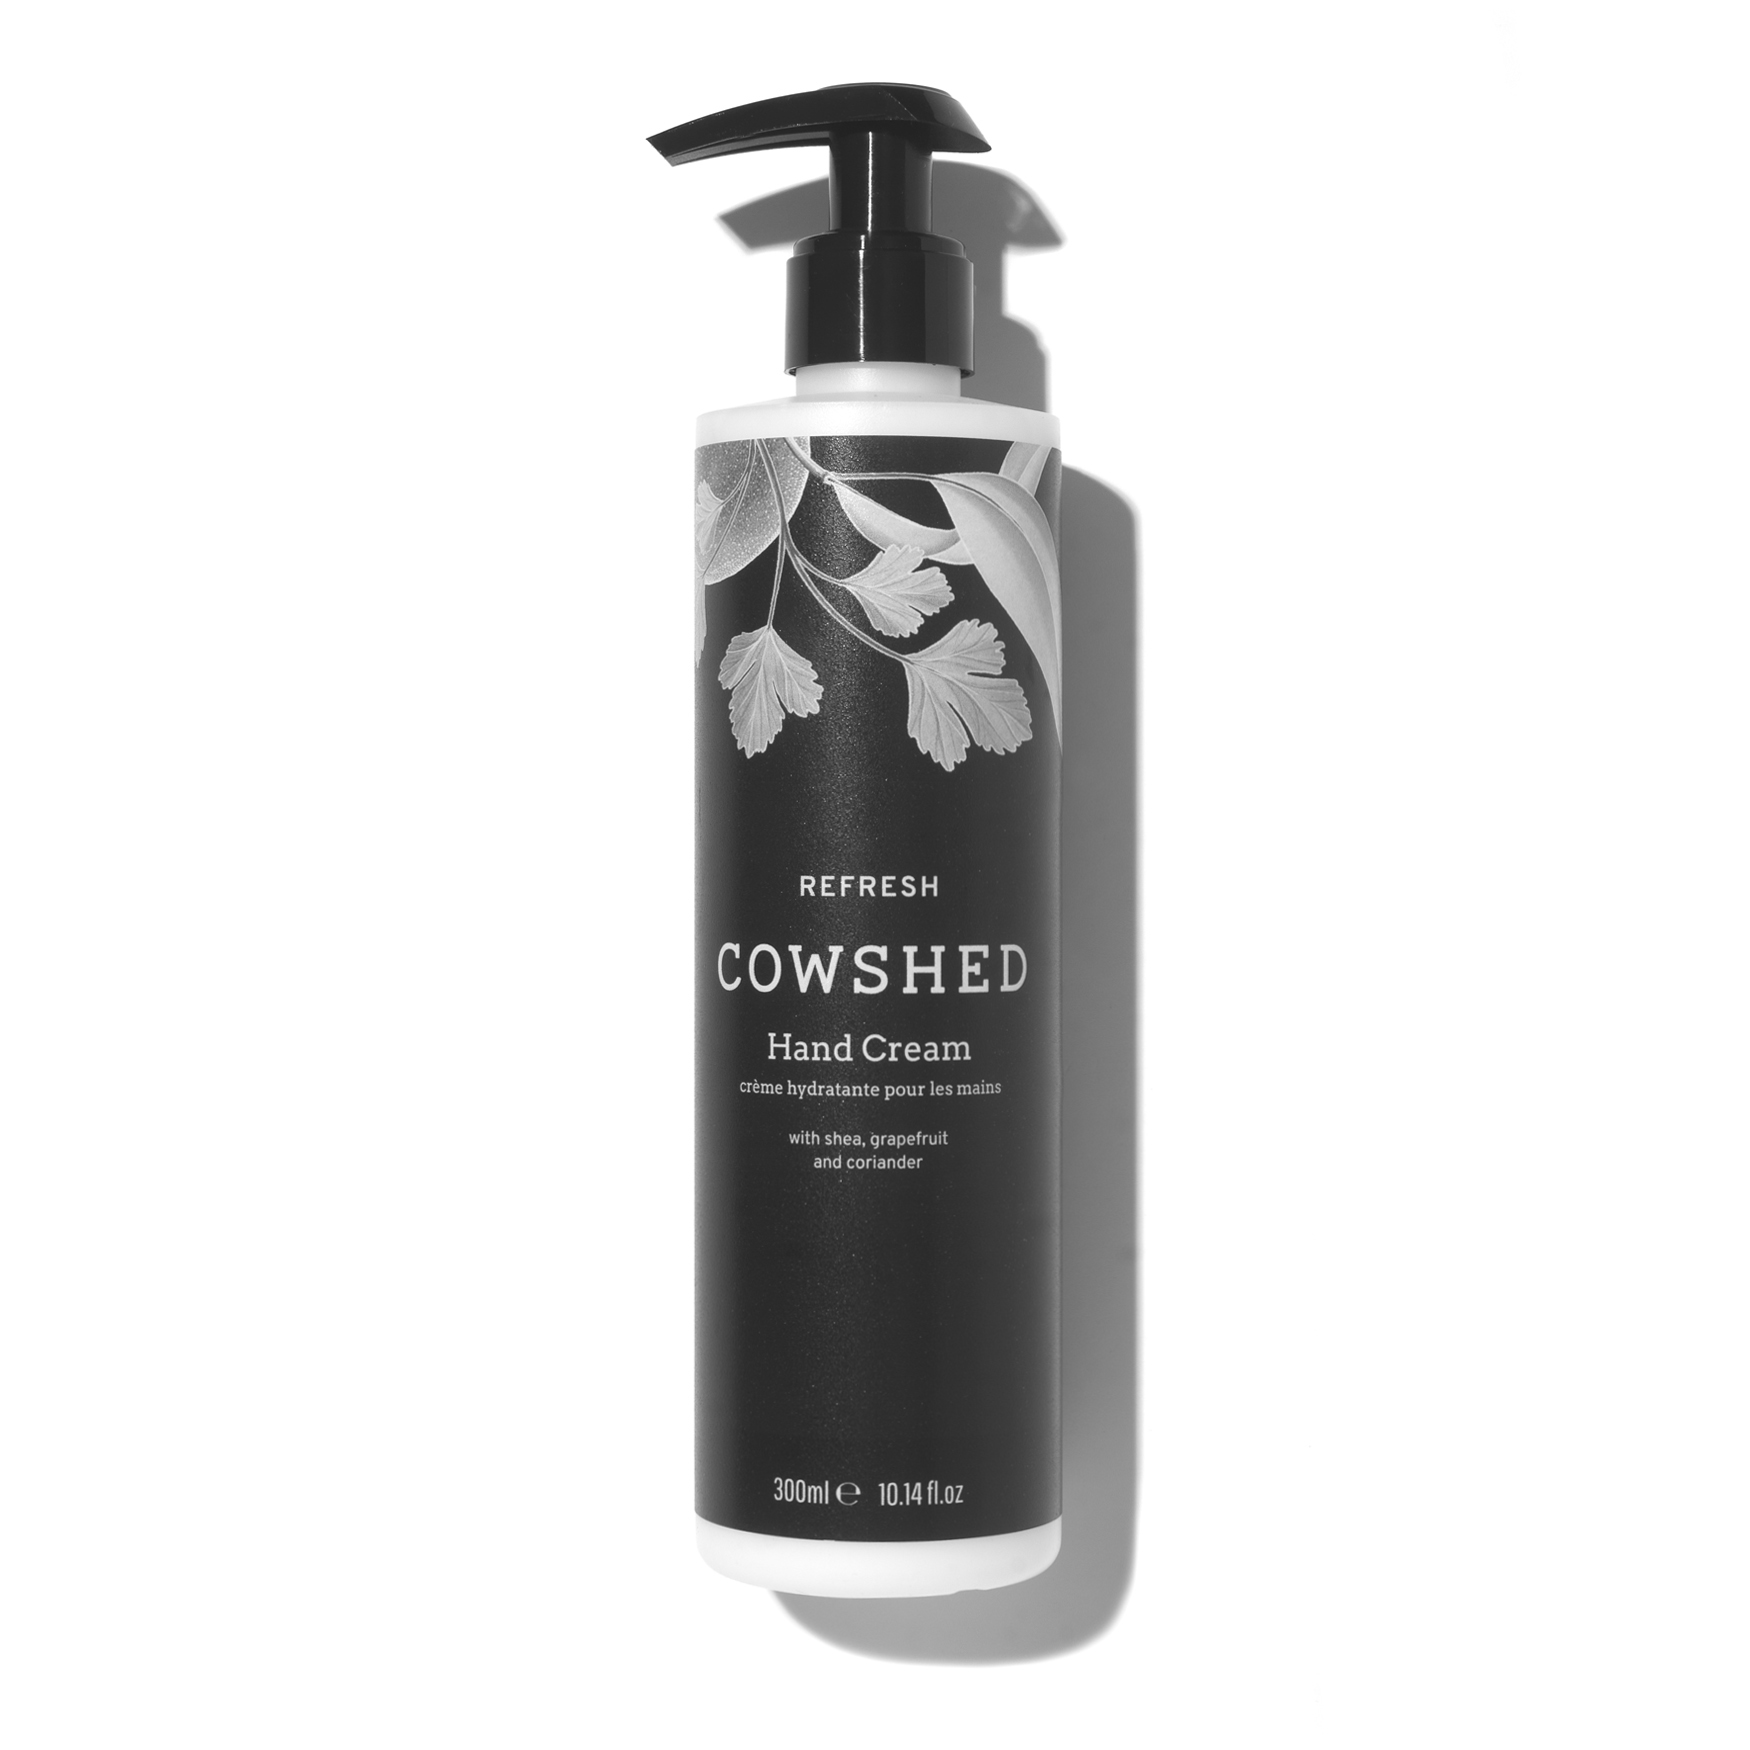 Cowshed Refresh Hand Cream | Space NK